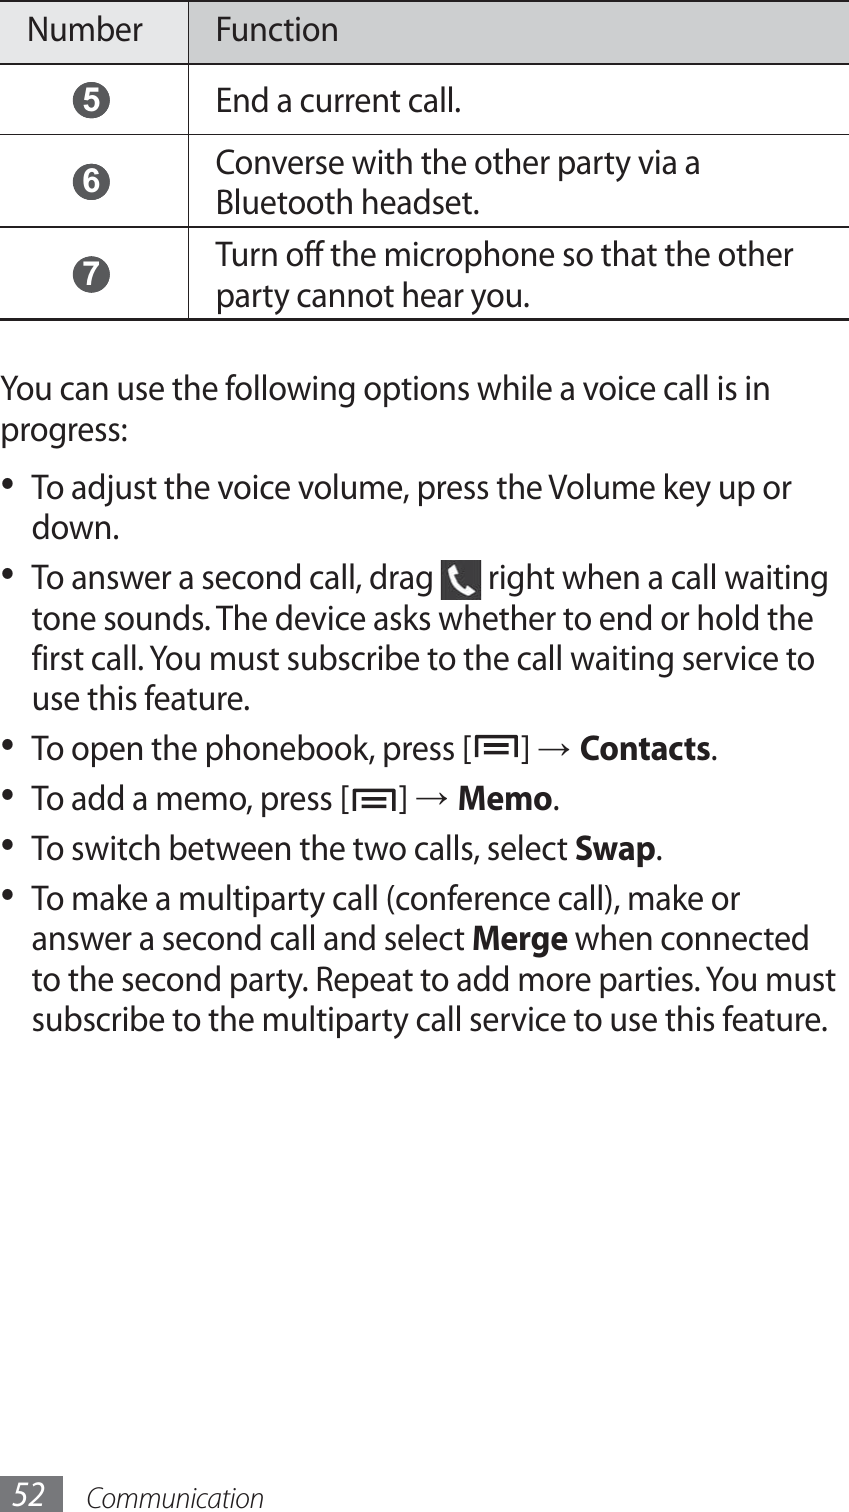 Communication52Number Function 5 End a current call. 6 Converse with the other party via a Bluetooth headset. 7 Turn off the microphone so that the other party cannot hear you.You can use the following options while a voice call is in progress:To adjust the voice volume, press the Volume key up or • down.To answer a second call, drag •   right when a call waiting tone sounds. The device asks whether to end or hold the first call. You must subscribe to the call waiting service to use this feature.To open the phonebook, press [•  ] → Contacts.To add a memo, press [•  ] → Memo.To switch between the two calls, select •  Swap.To make a multiparty call (conference call), make or • answer a second call and select Merge when connected to the second party. Repeat to add more parties. You must subscribe to the multiparty call service to use this feature.